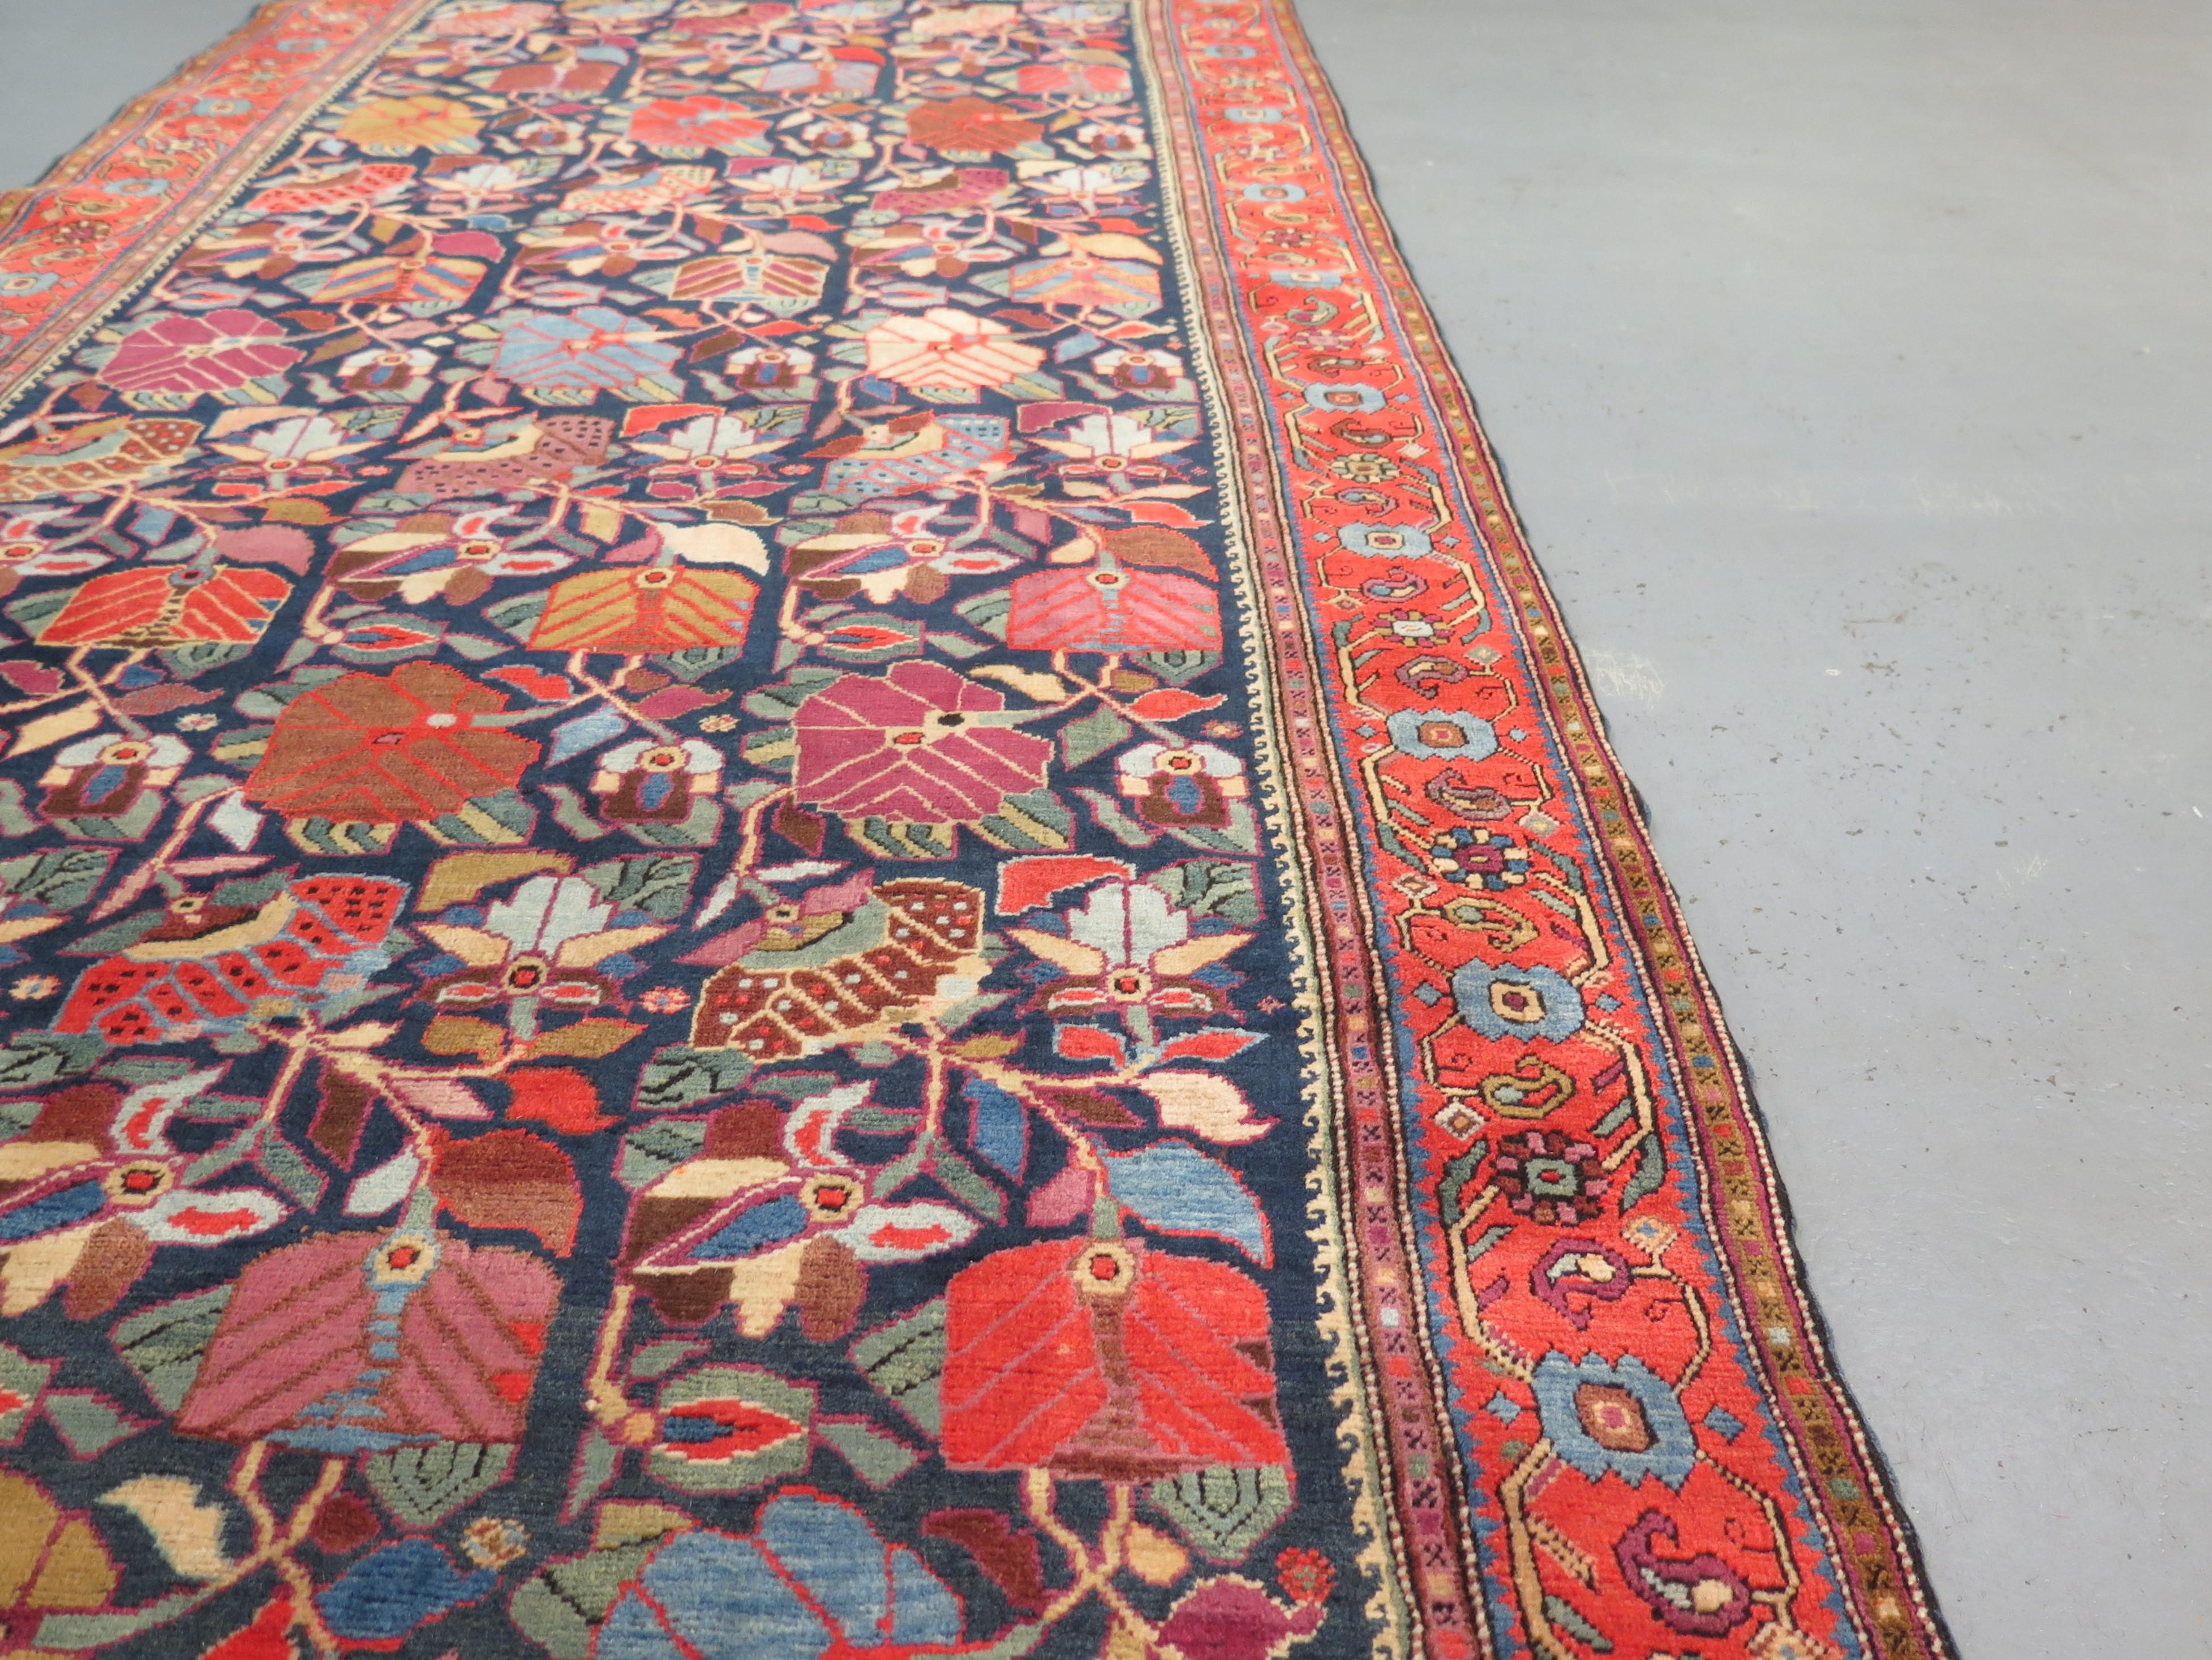 Antique Karabagh rugs are much sought after by collectors and designers as they boast some of the oldest and most varied designs of all Caucasian weavings, and represent perhaps the finest in quality and artistry amongst pieces from this